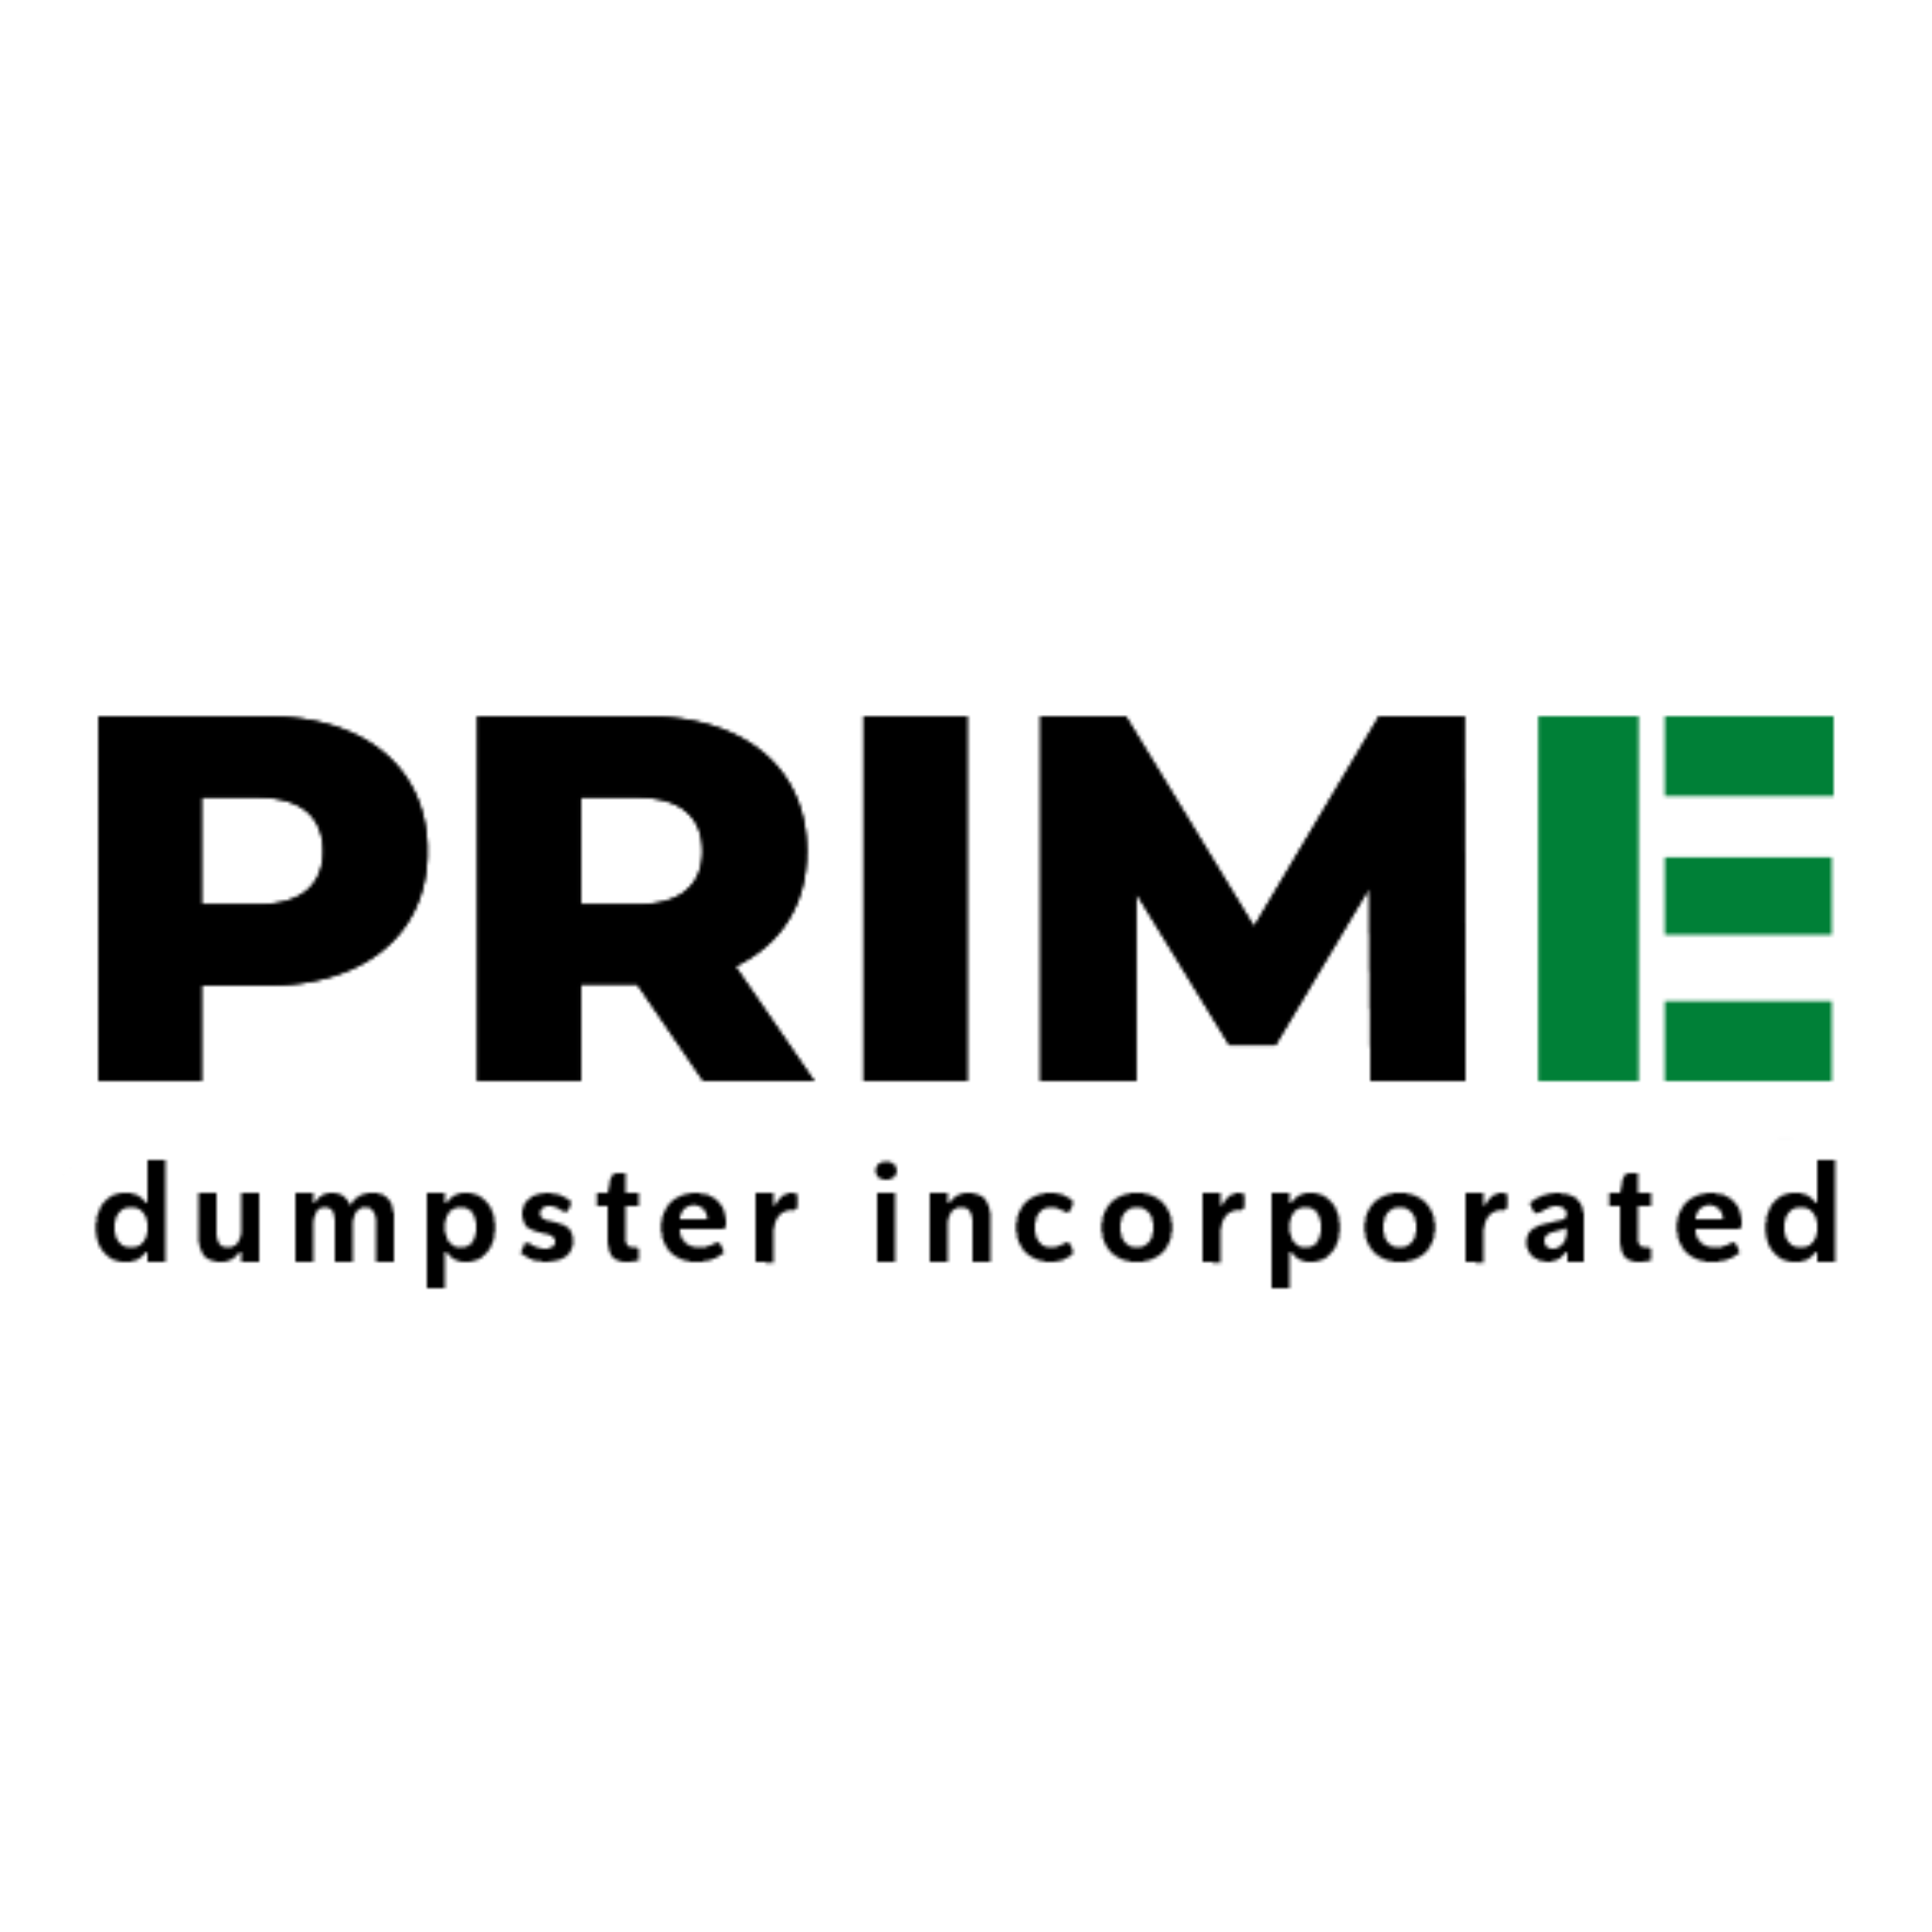 Prime Dumpster Incorporated Expands Reach, Offering Exceptional Dumpster Rentals in Cincinnati, Ohio